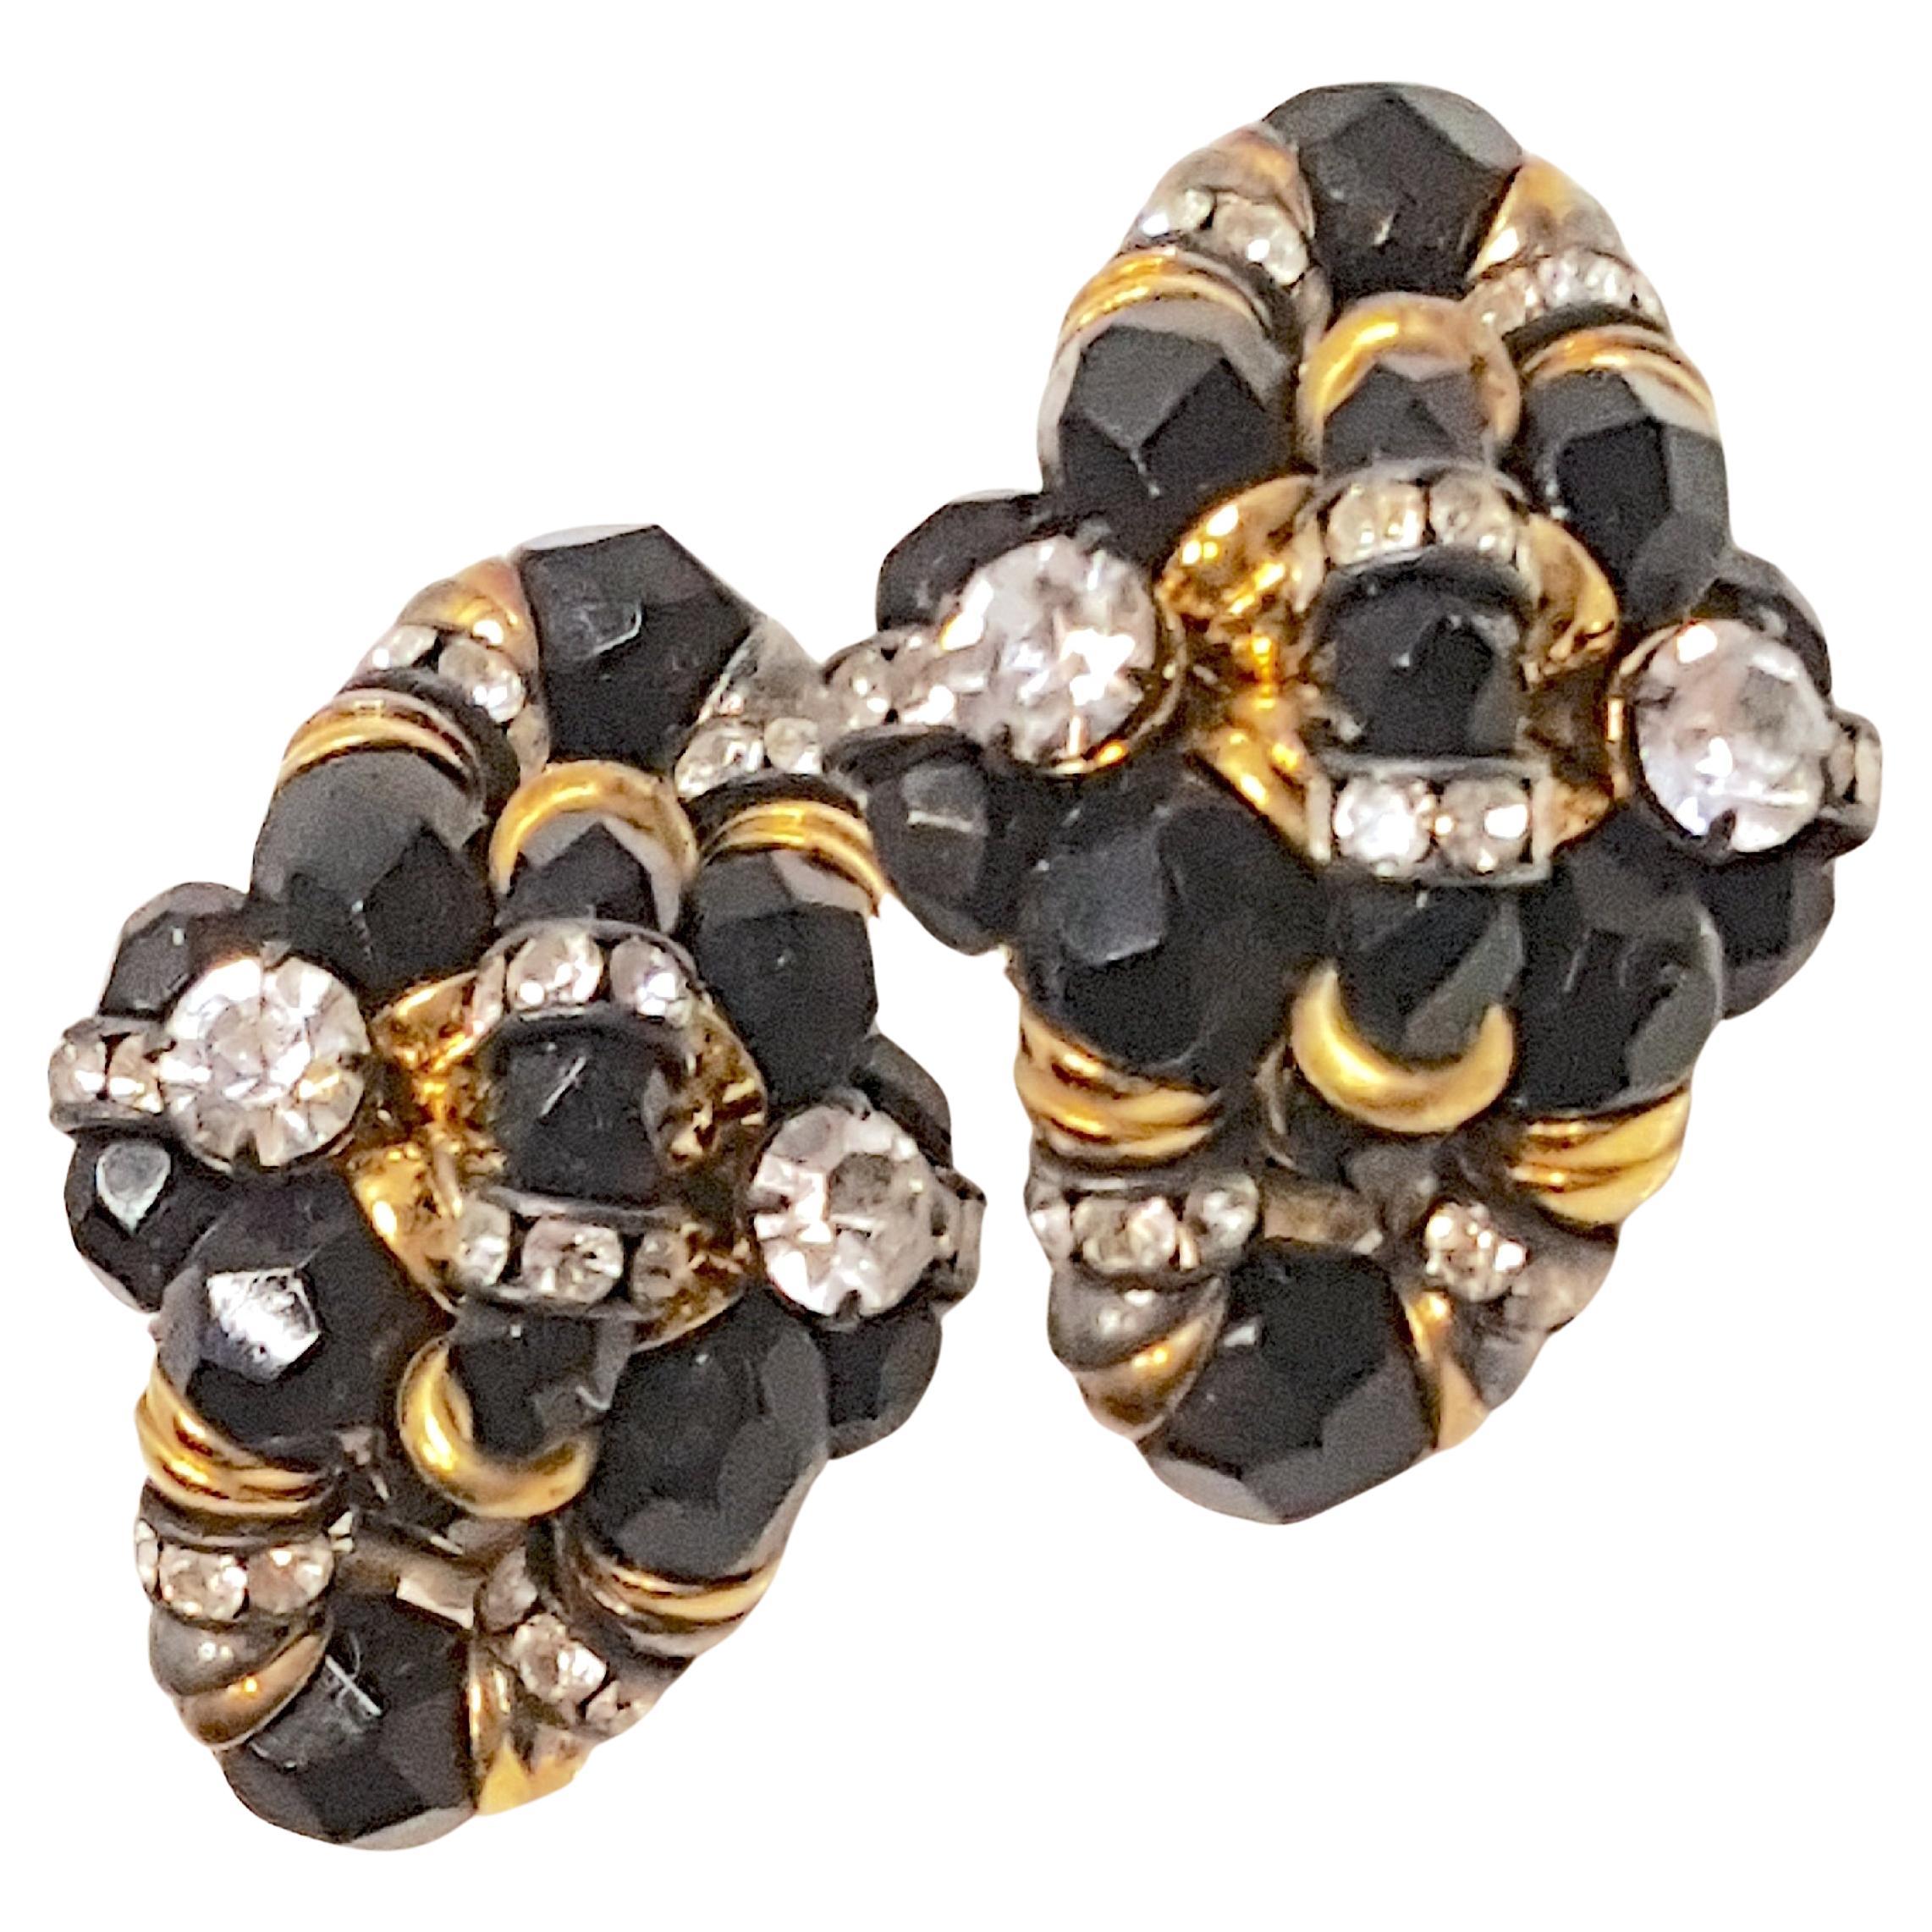 Couture Montague 1950s French WiredGlassBeads CrystalEnameledRondelles Earrings For Sale